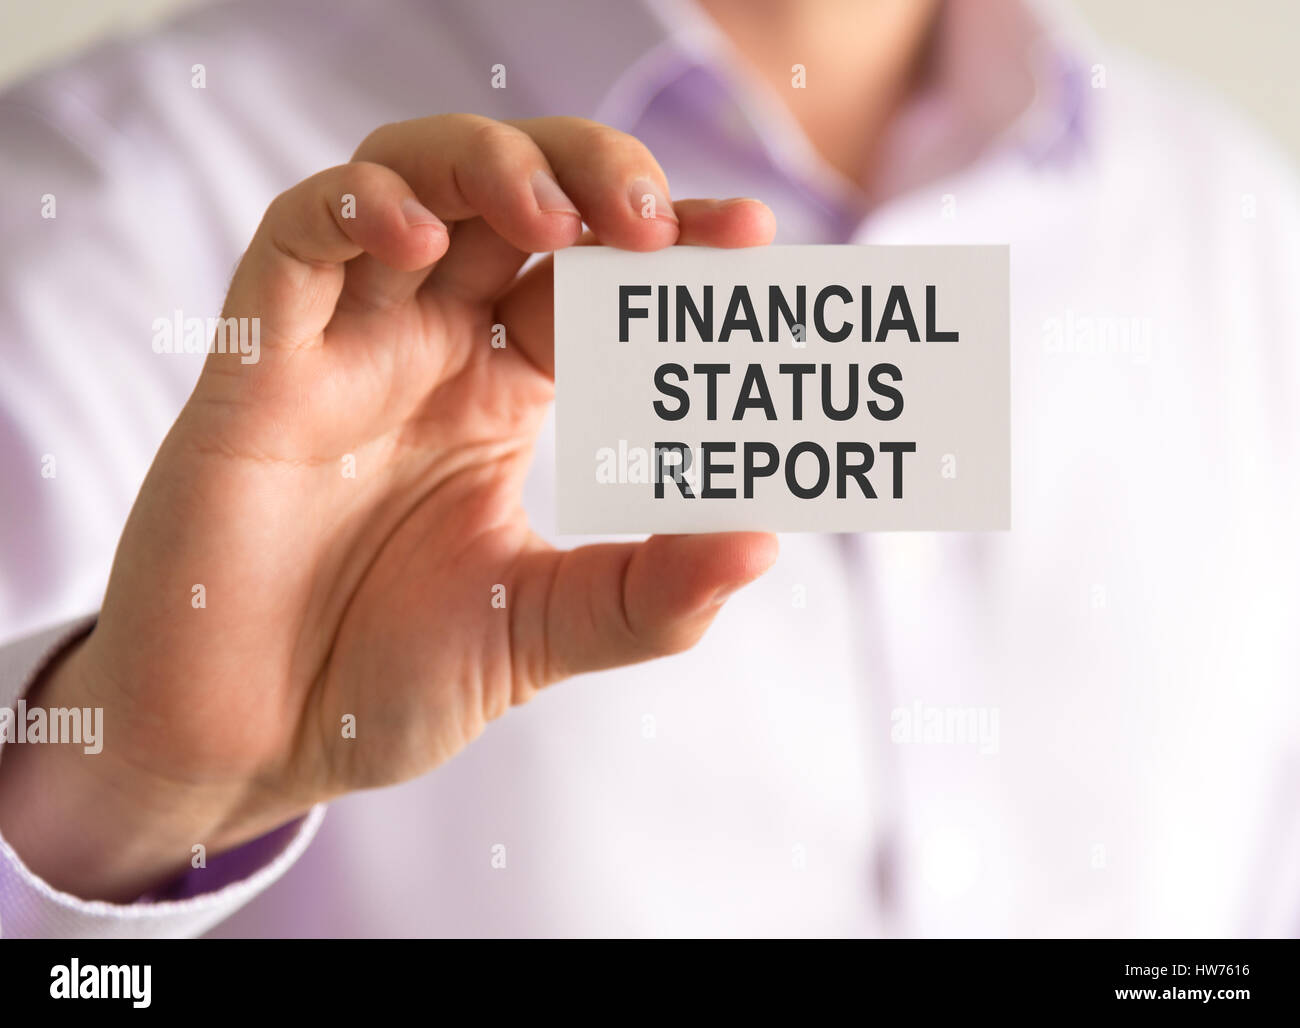 Closeup on businessman holding a card with FINANCIAL STATUS REPORT message, business concept image with soft focus background Stock Photo